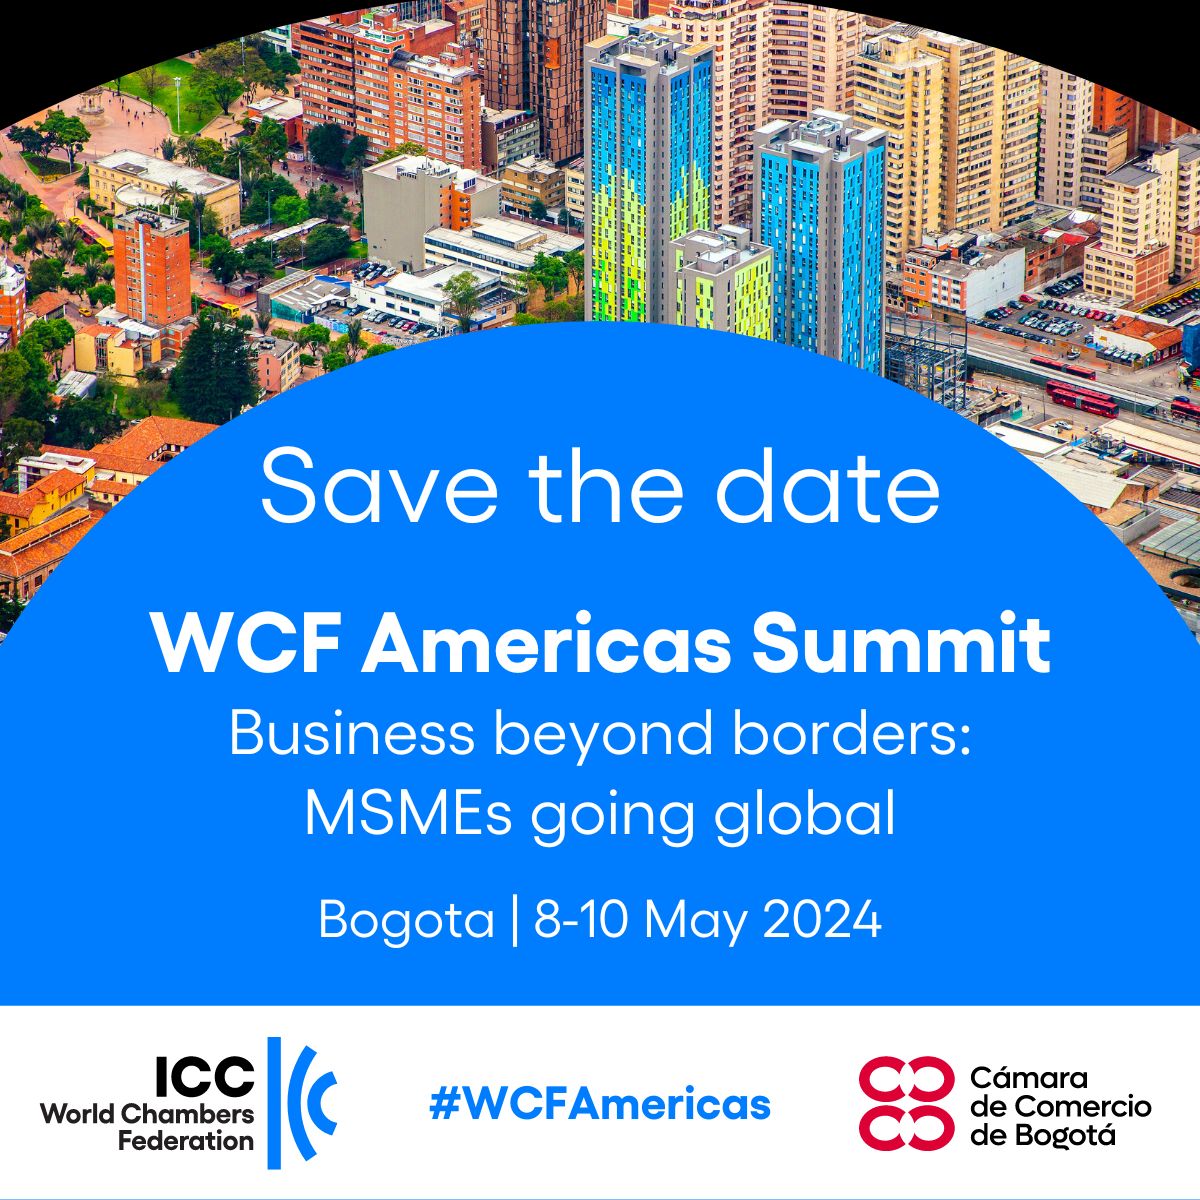 Be part of it all: the first ever @WorldChambers Regional Summit in the Americas is just 2 weeks away. Register now ✍️ bit.ly/3SnT5Ca 📍 Bogotá (in-person event) 📆 8-10 May @camaracomerbog #CCB145